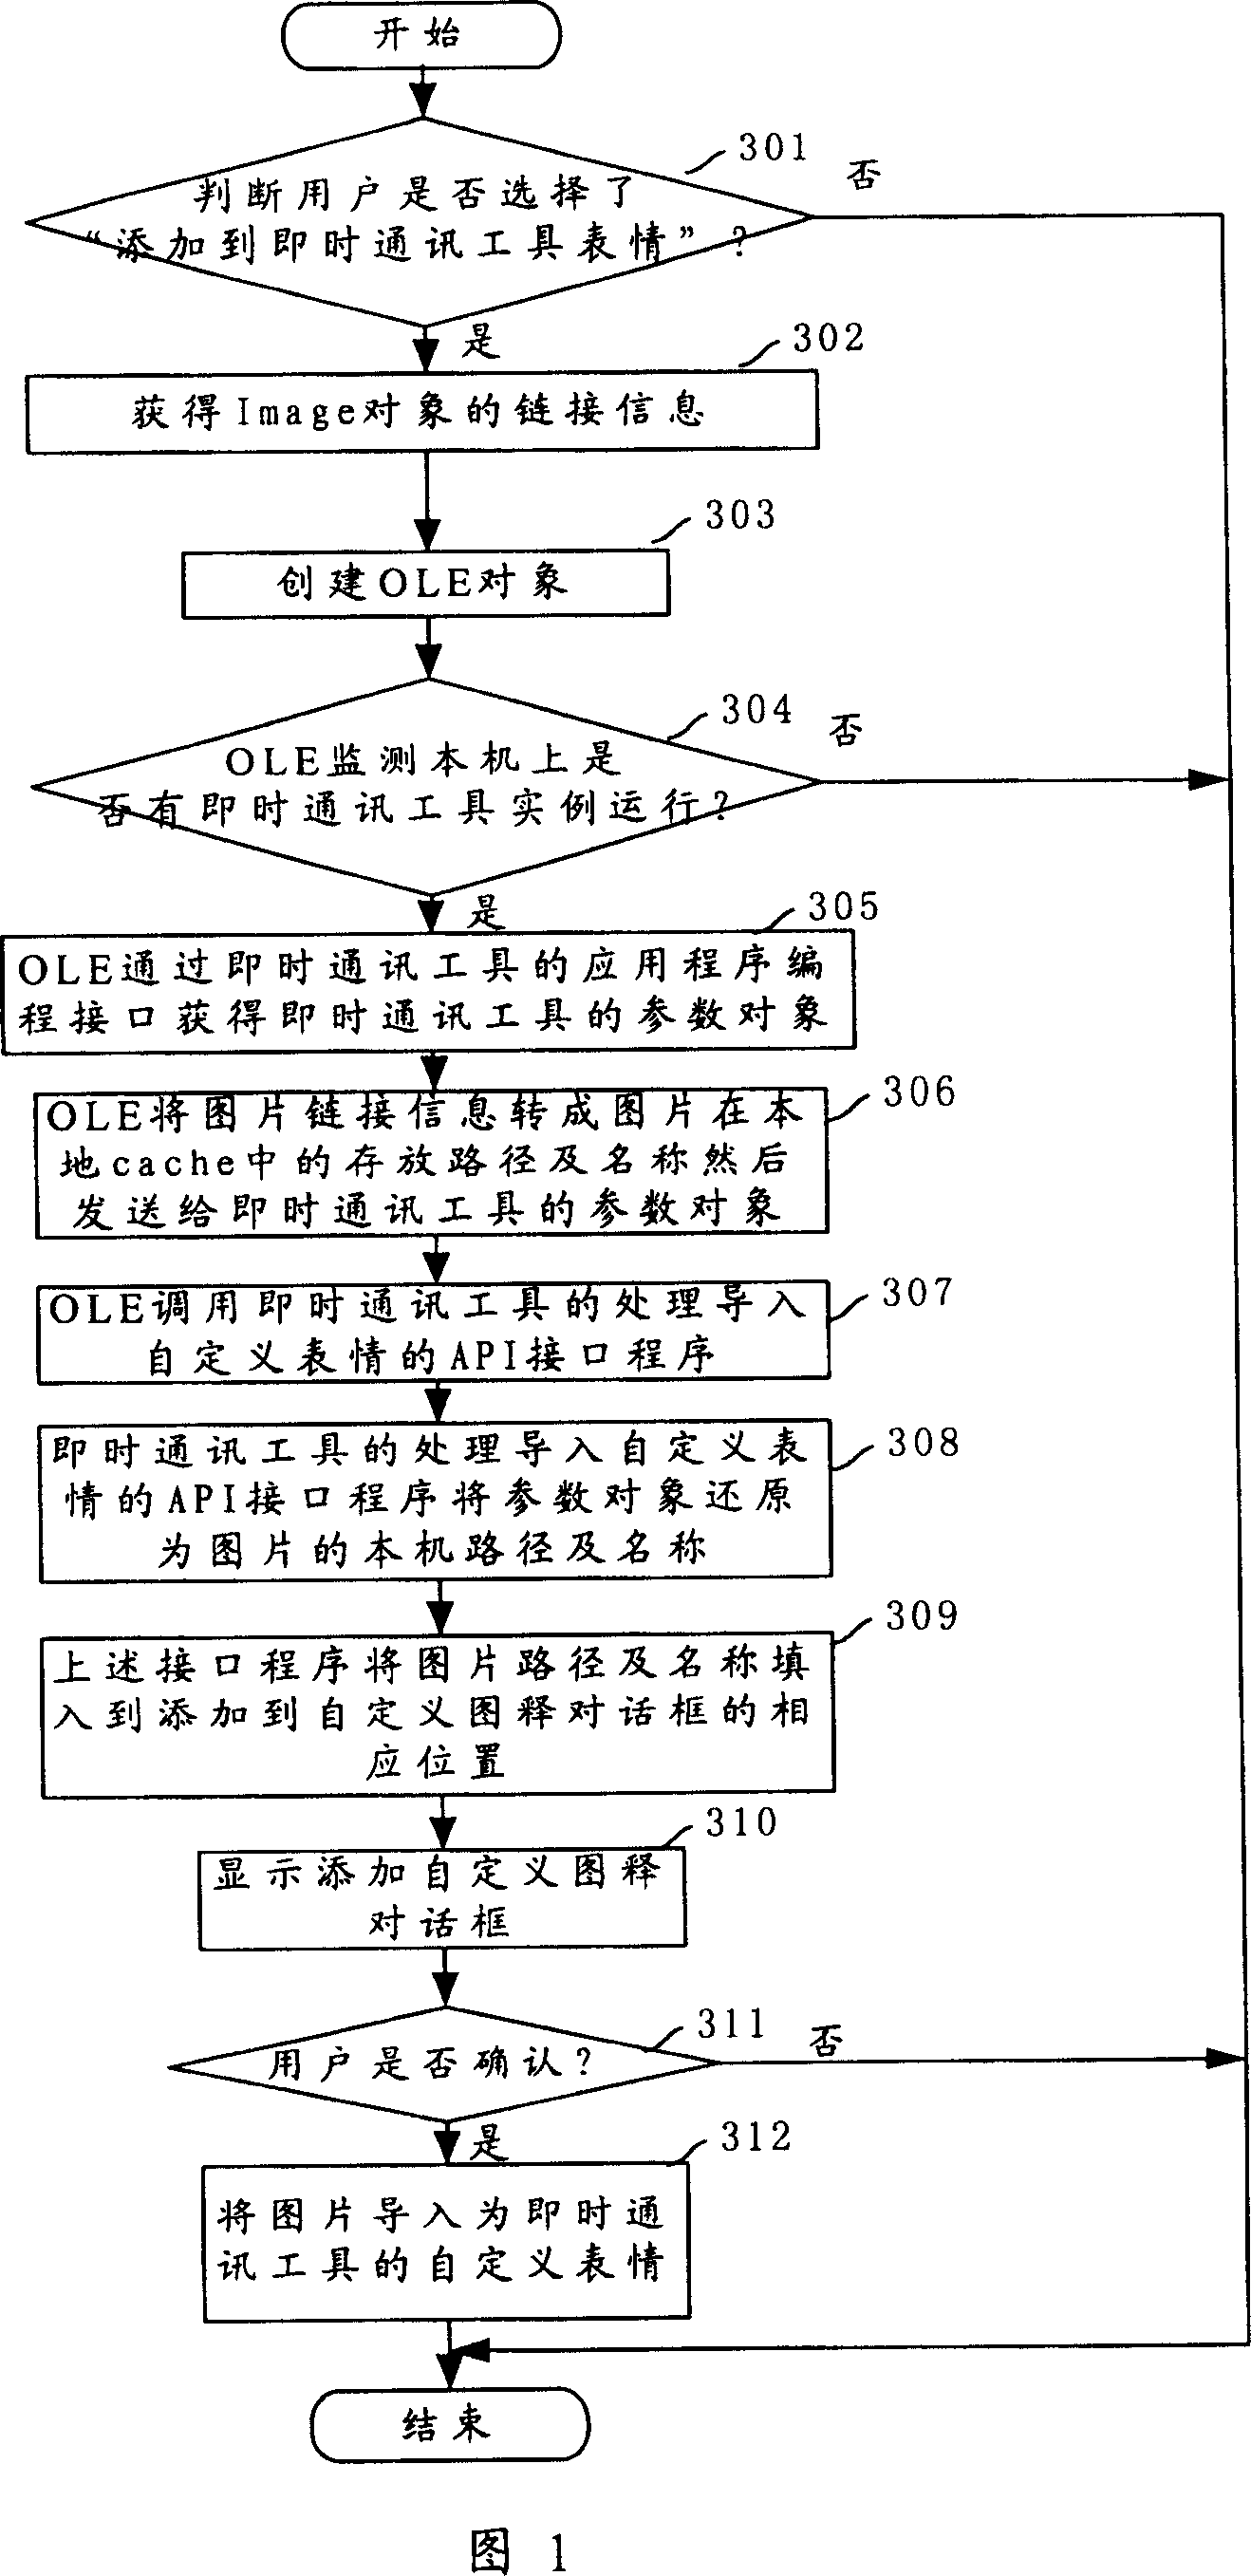 Method of making network page picture directly apply to instant communication tool